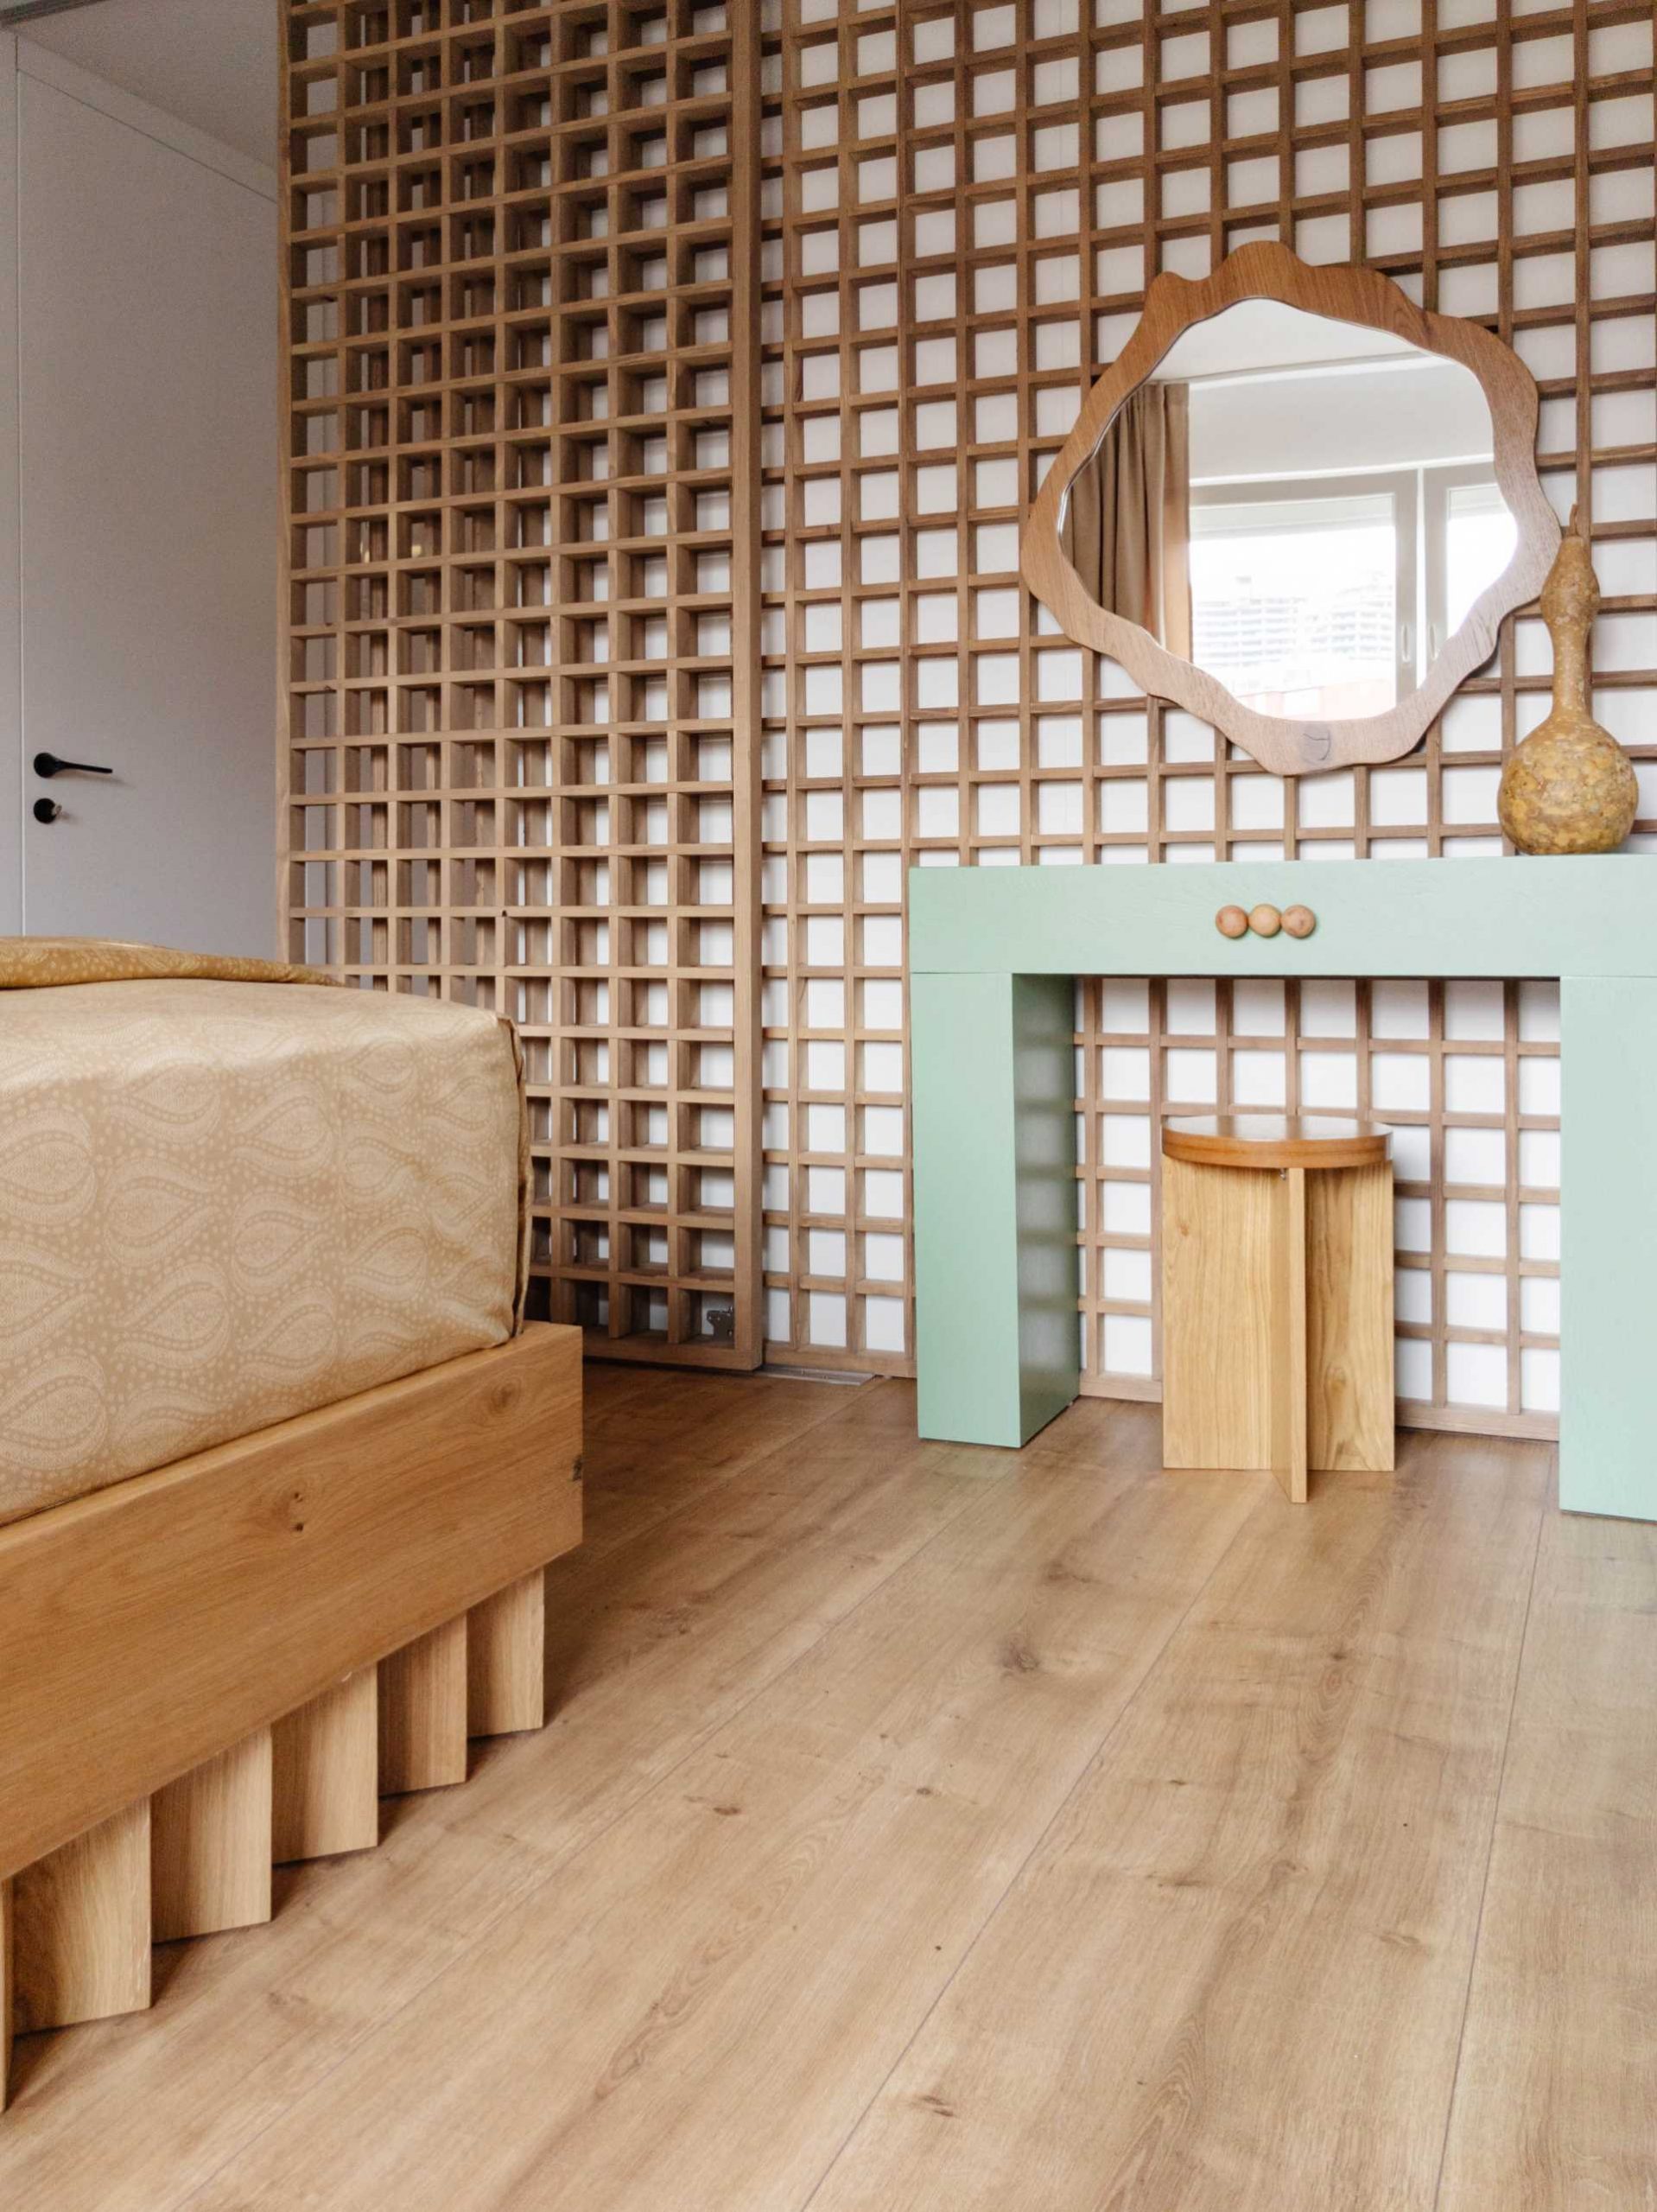 In the bedroom, there's a geometric wood accent that covers the wall, while the a wood bed frame has a unique design for it's base.